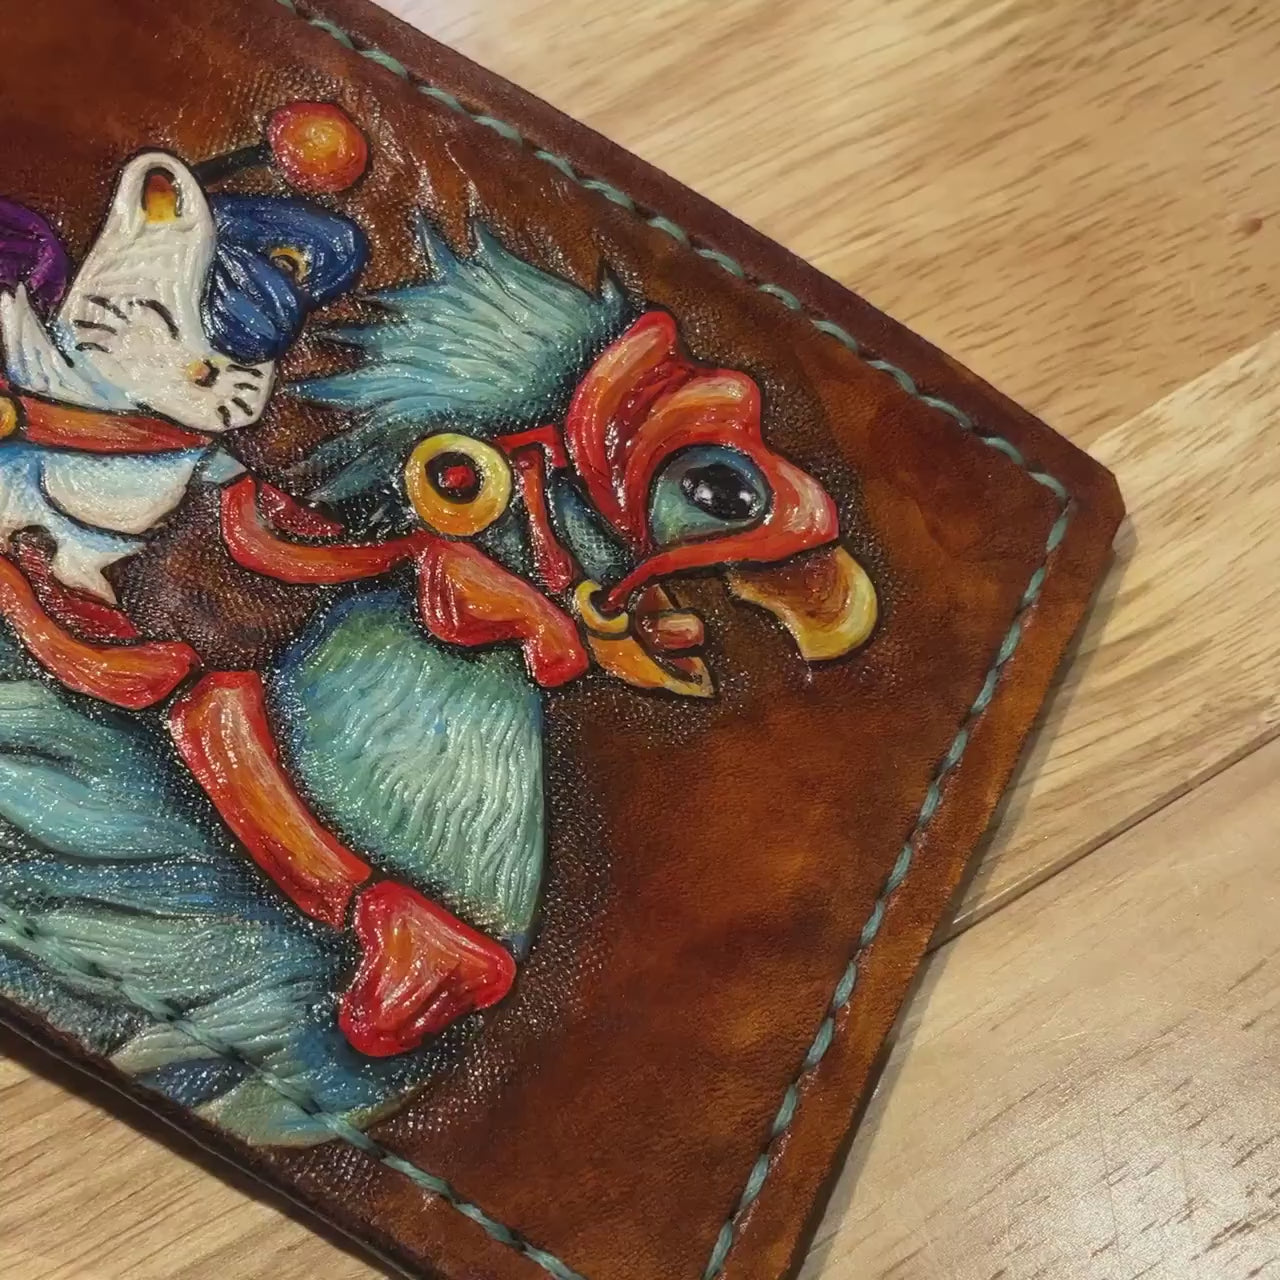 Chocobo and baby, Mog and moogle messenger - cerulean - dark brown Leather Bifold Wallet - Handcrafted Final Fantasy 14 inspired Wallet -